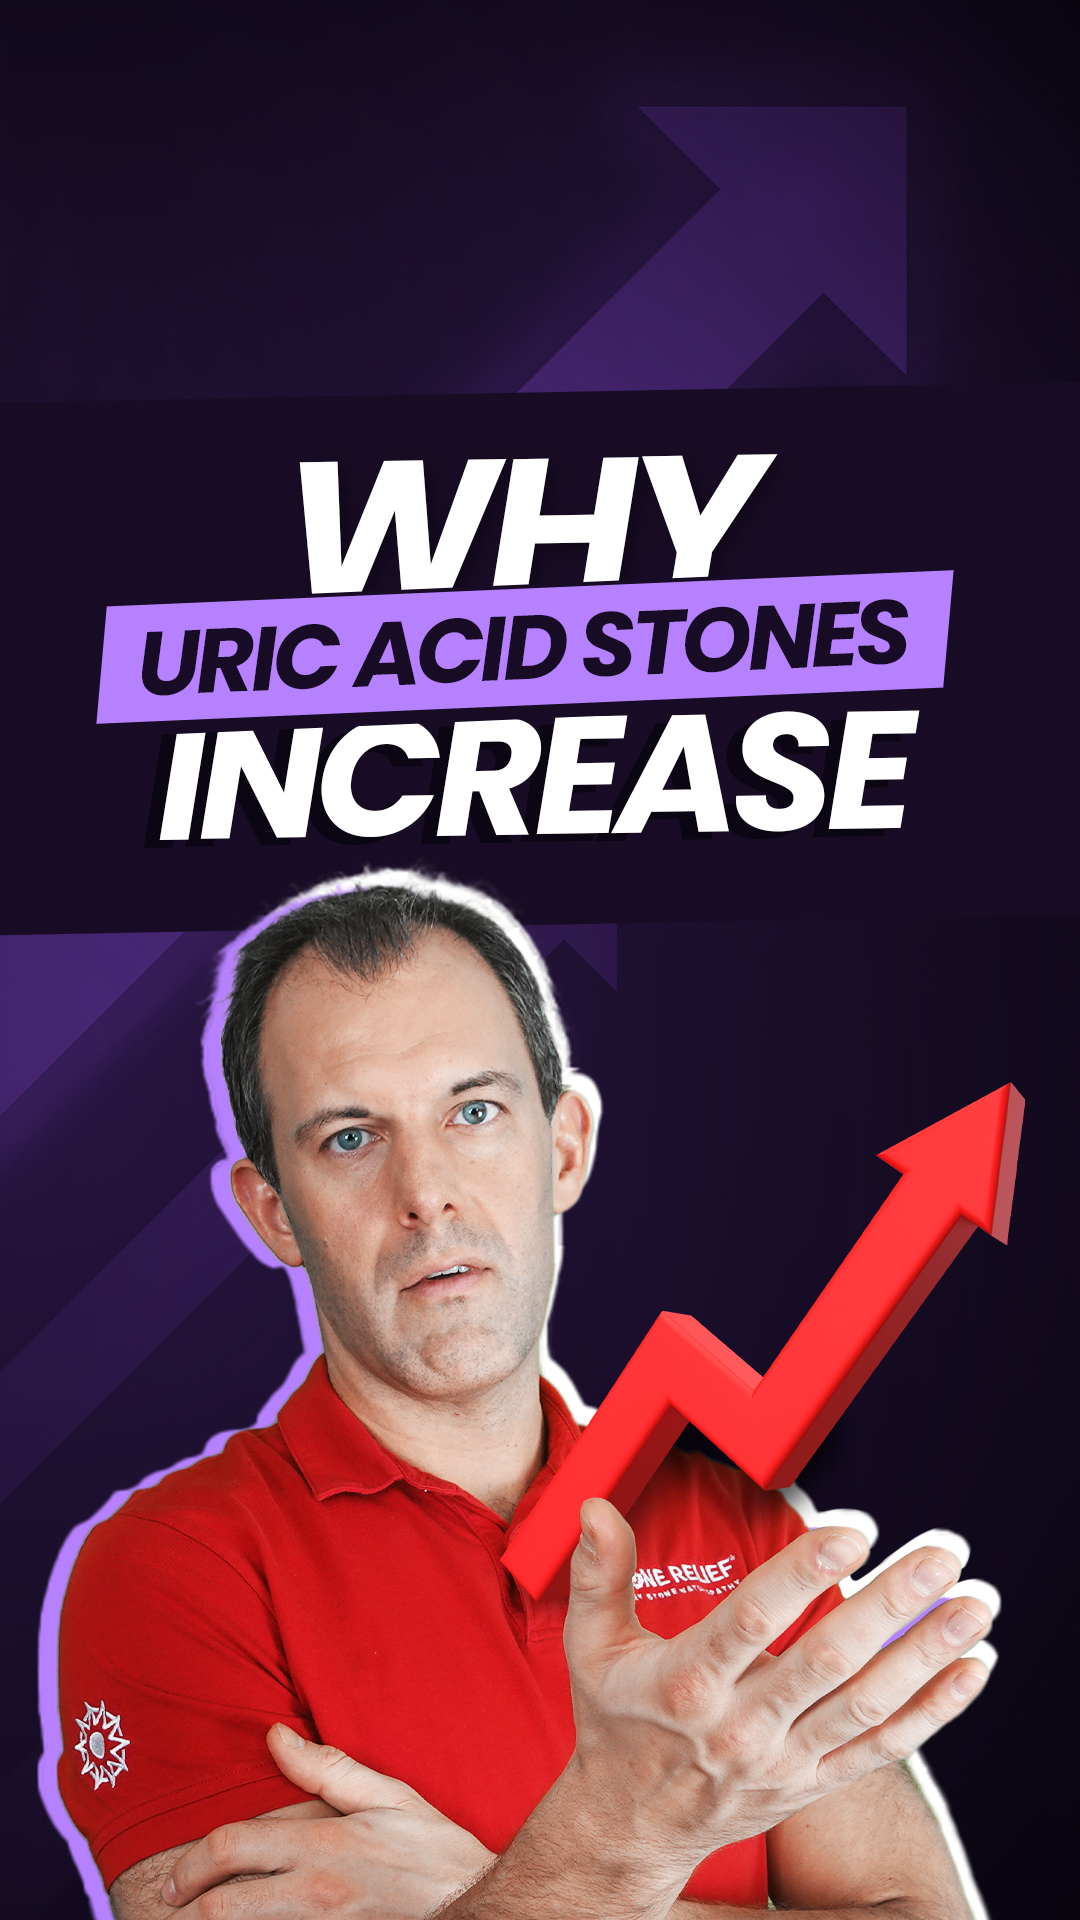 Why do uric acid stones increase?